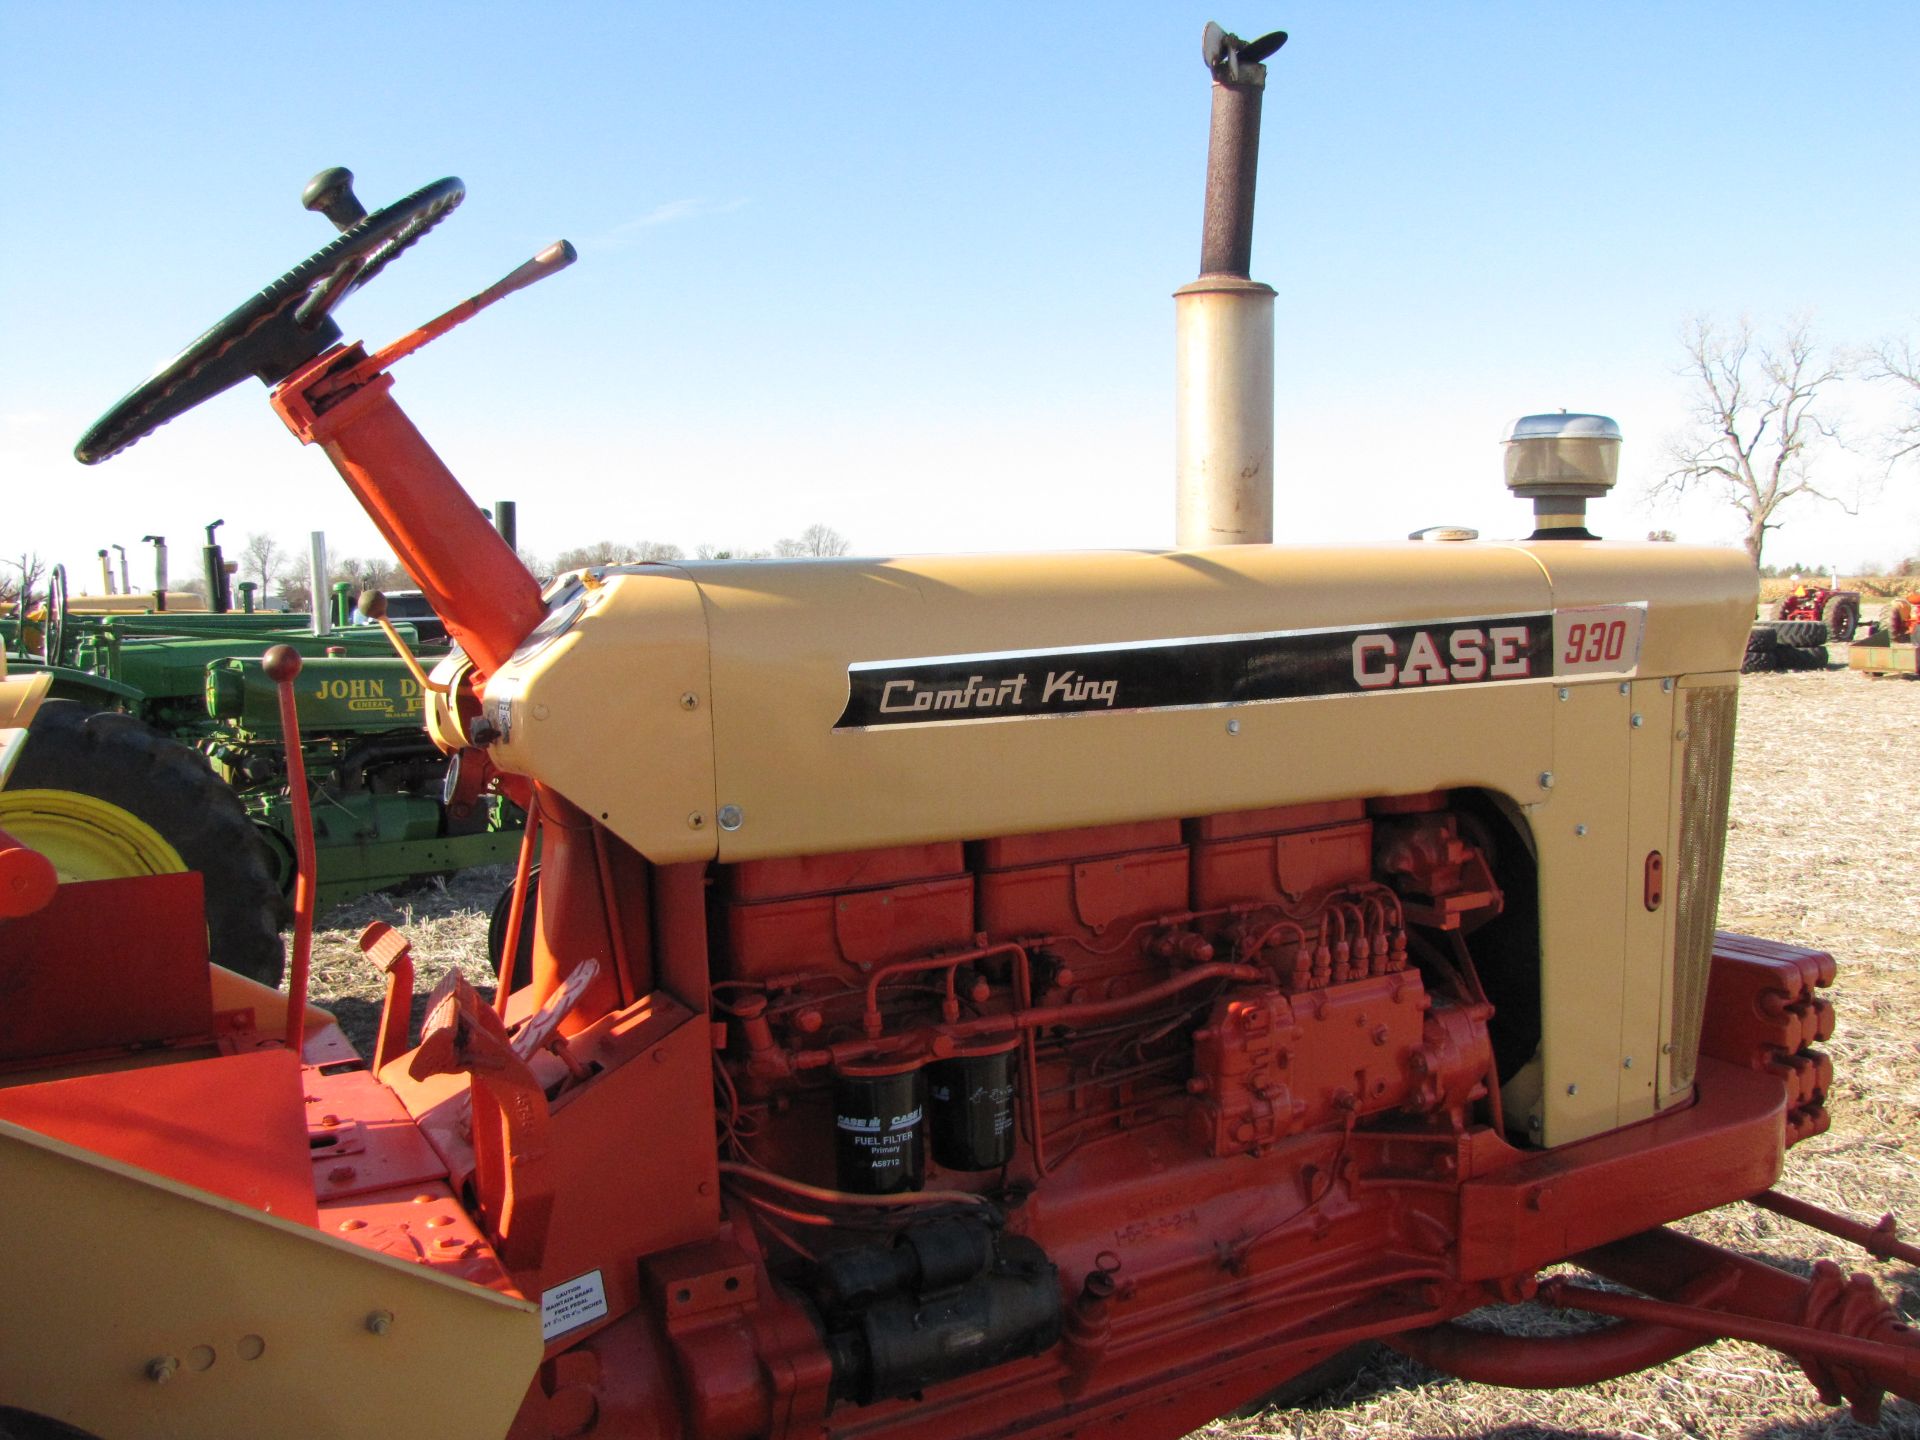 Case 930 Comfort King Tractor - Image 27 of 43